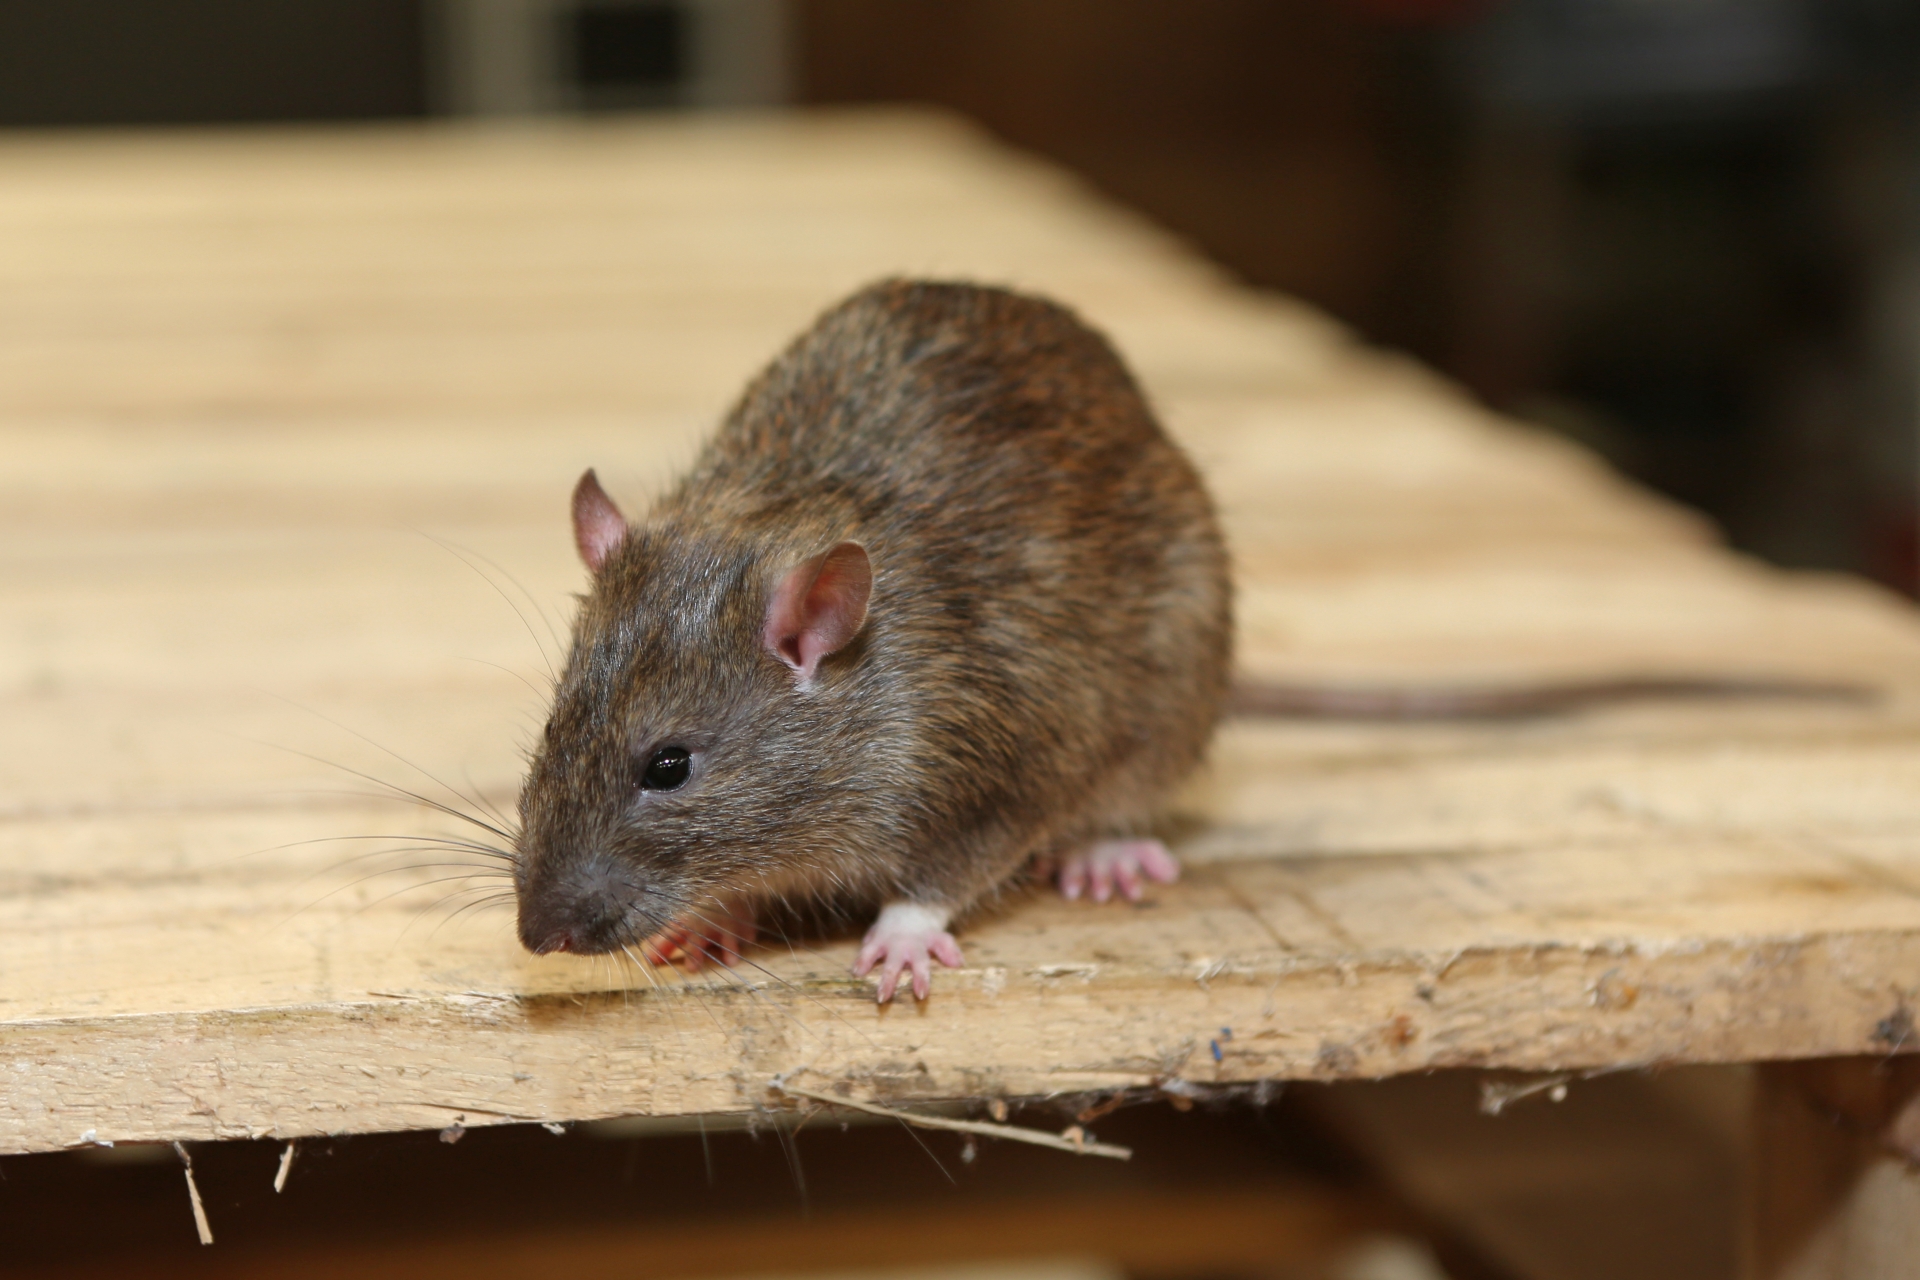 Rat extermination, Pest Control in Becontree Heath, Becontree, RM8. Call Now 020 8166 9746